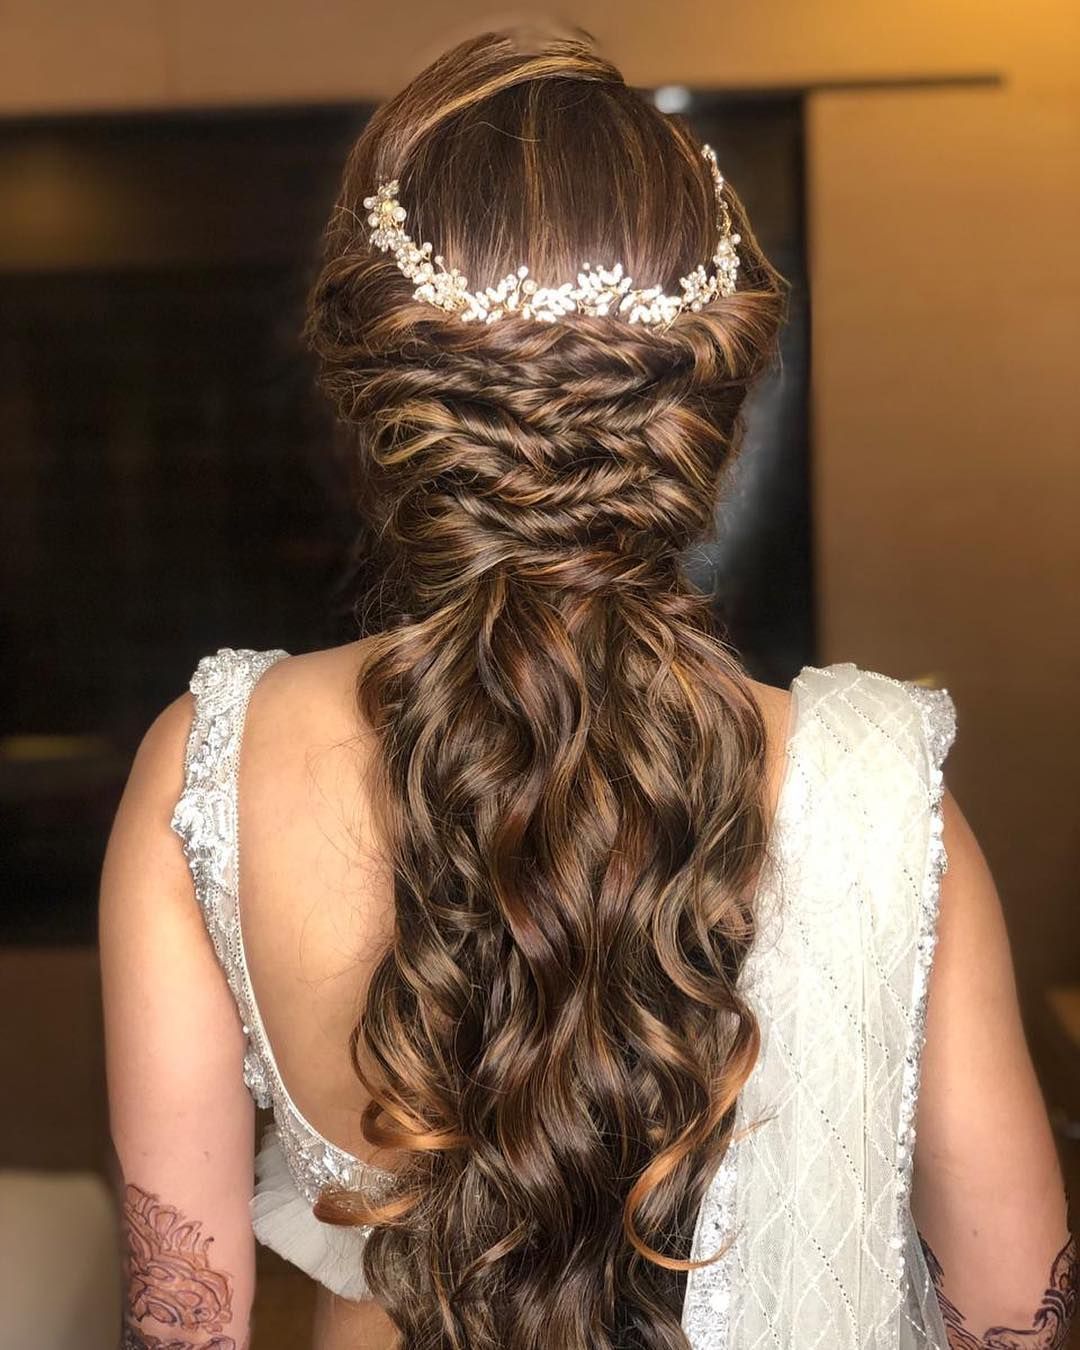 Stylish Open-Hair Bridal Hairstyles for Your Reception | Indian Bridal Reception  Hairstyles | Curled hairstyles for medium hair, Bridal hair buns, Hair up  styles